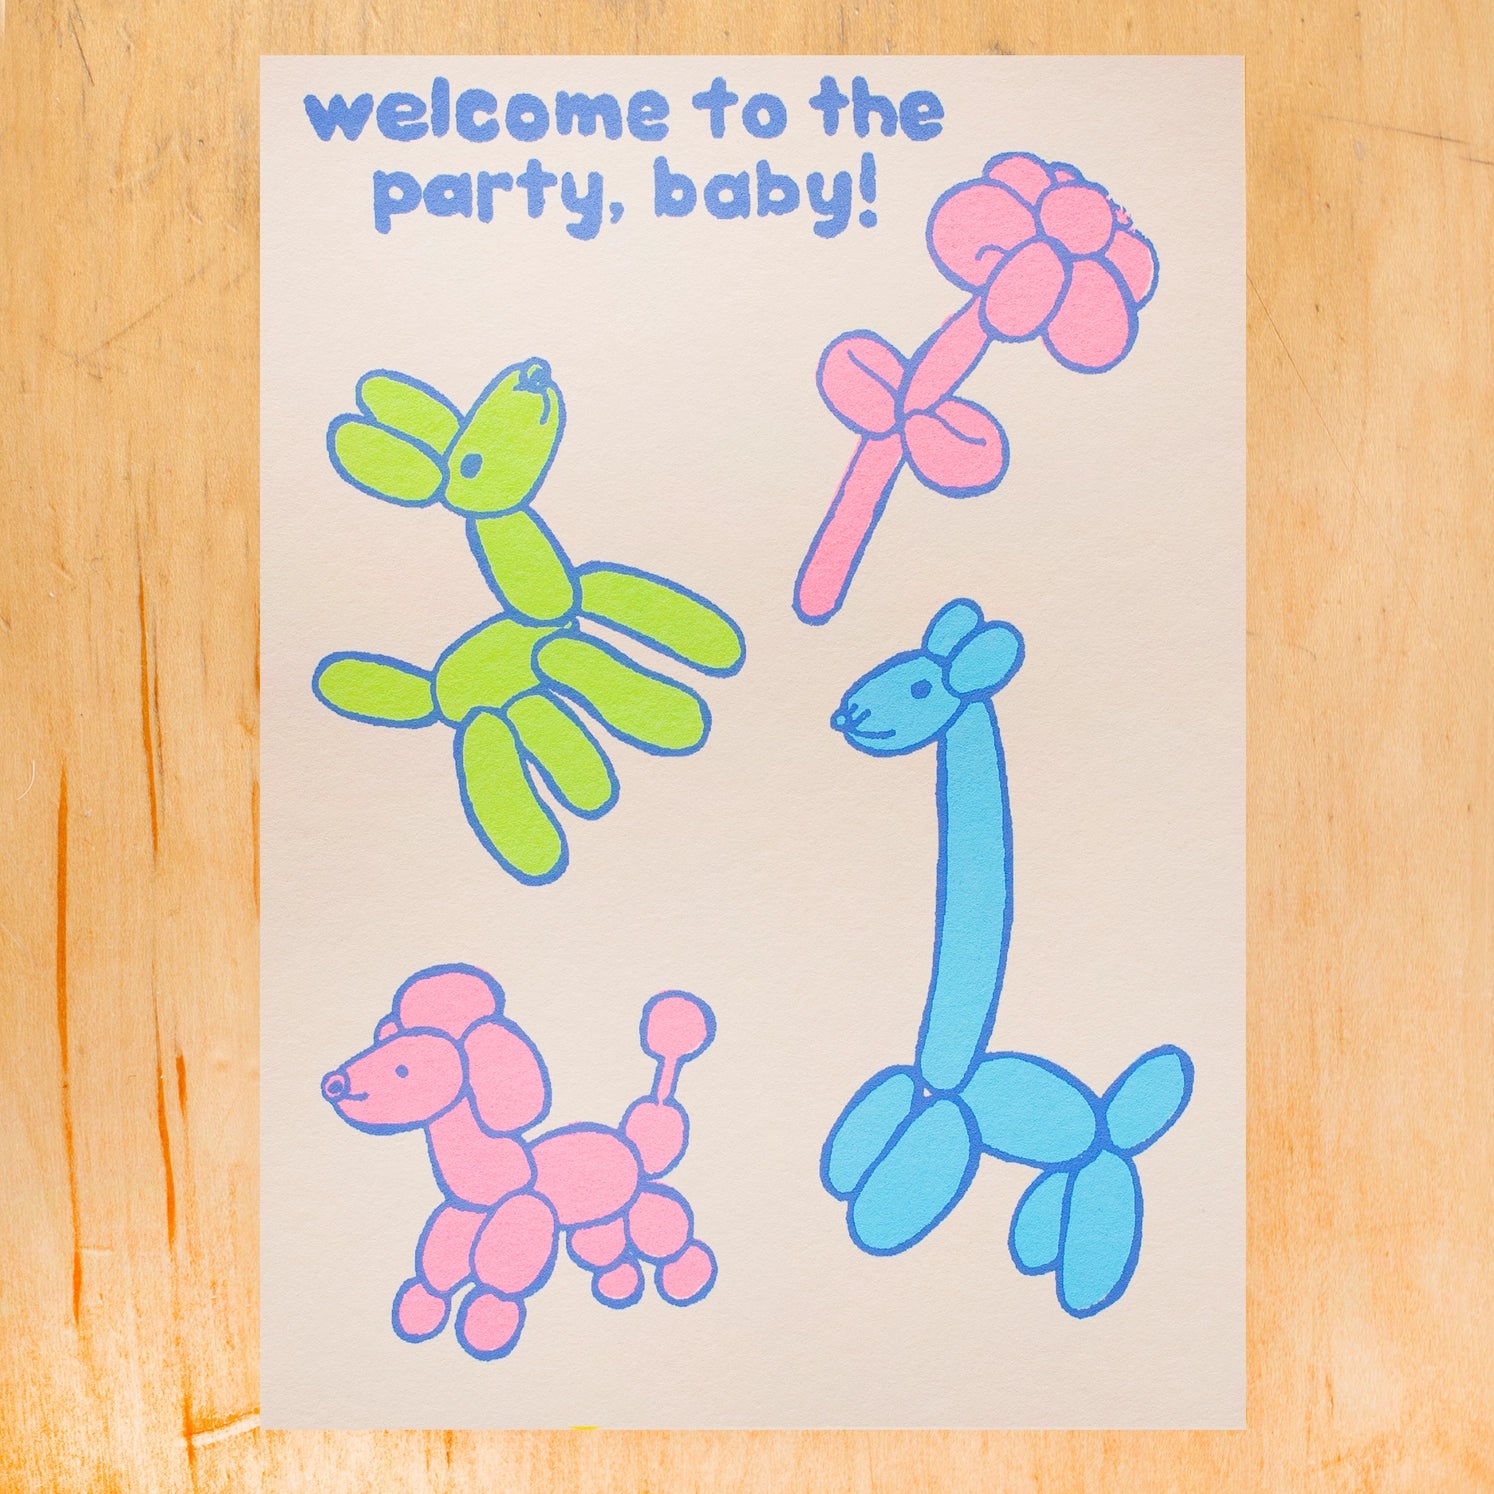 Welcome To the Party, Baby Greeting Card - Twinkle Twinkle Little One